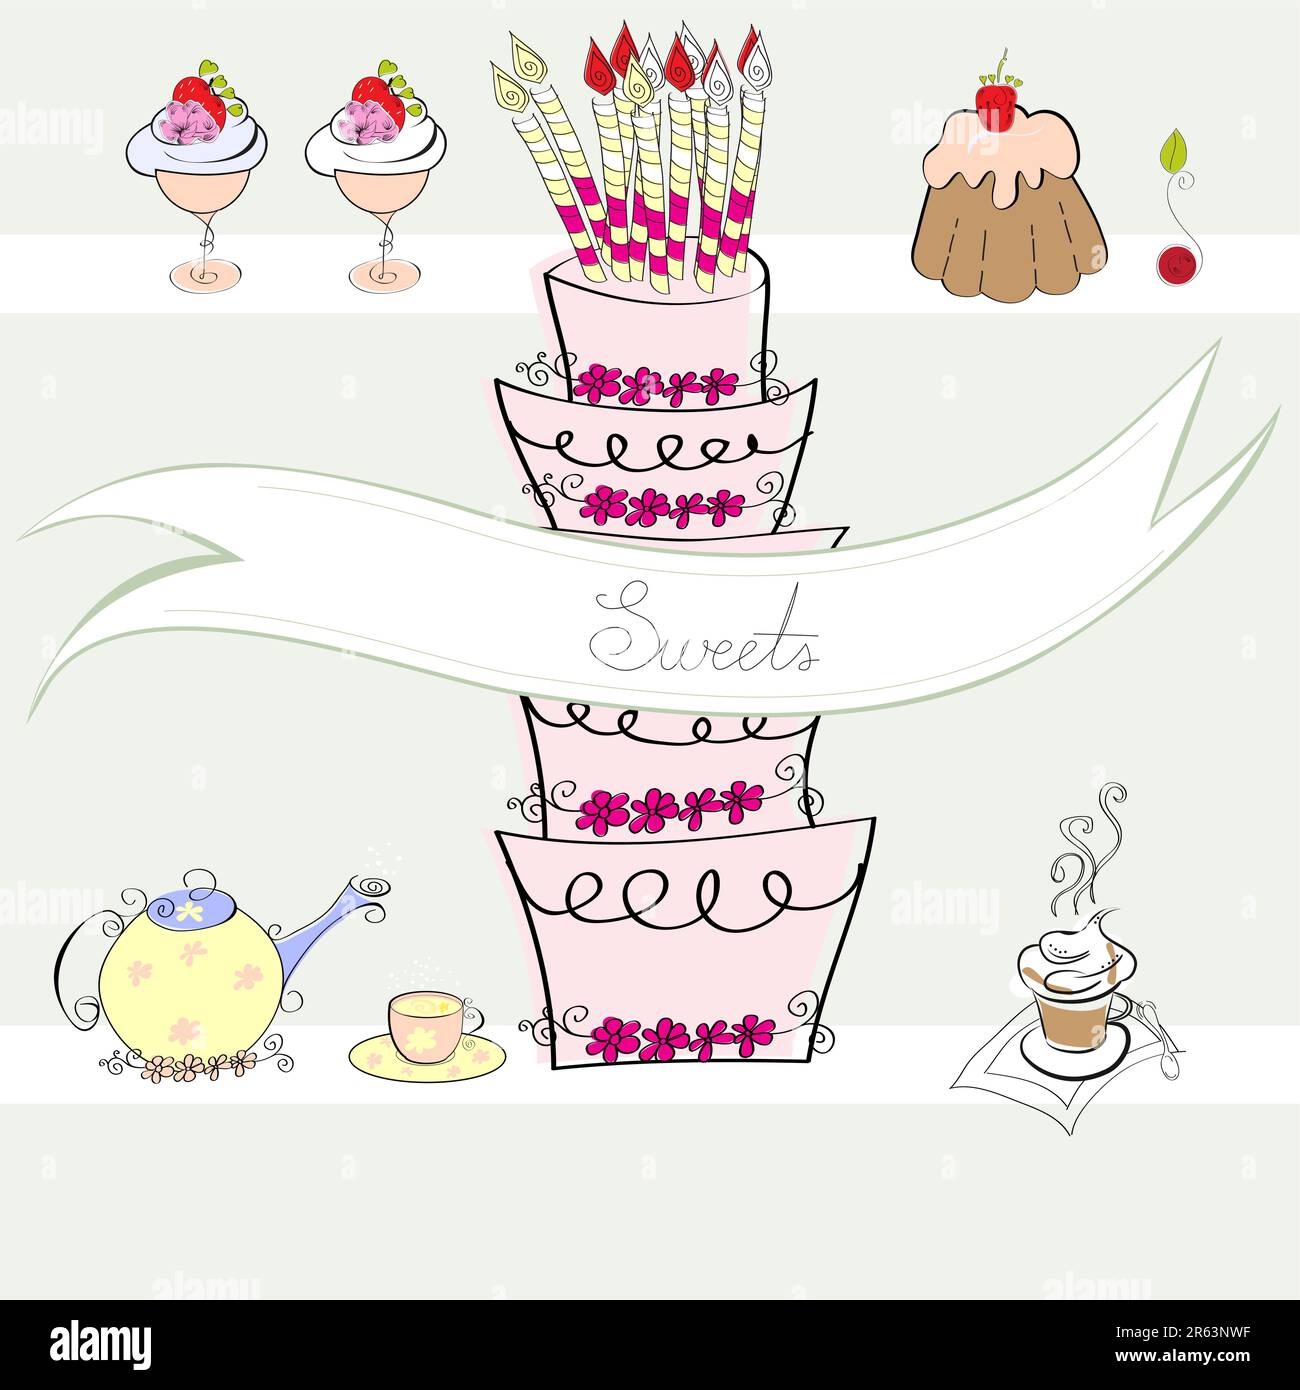 Sweets Stock Vector